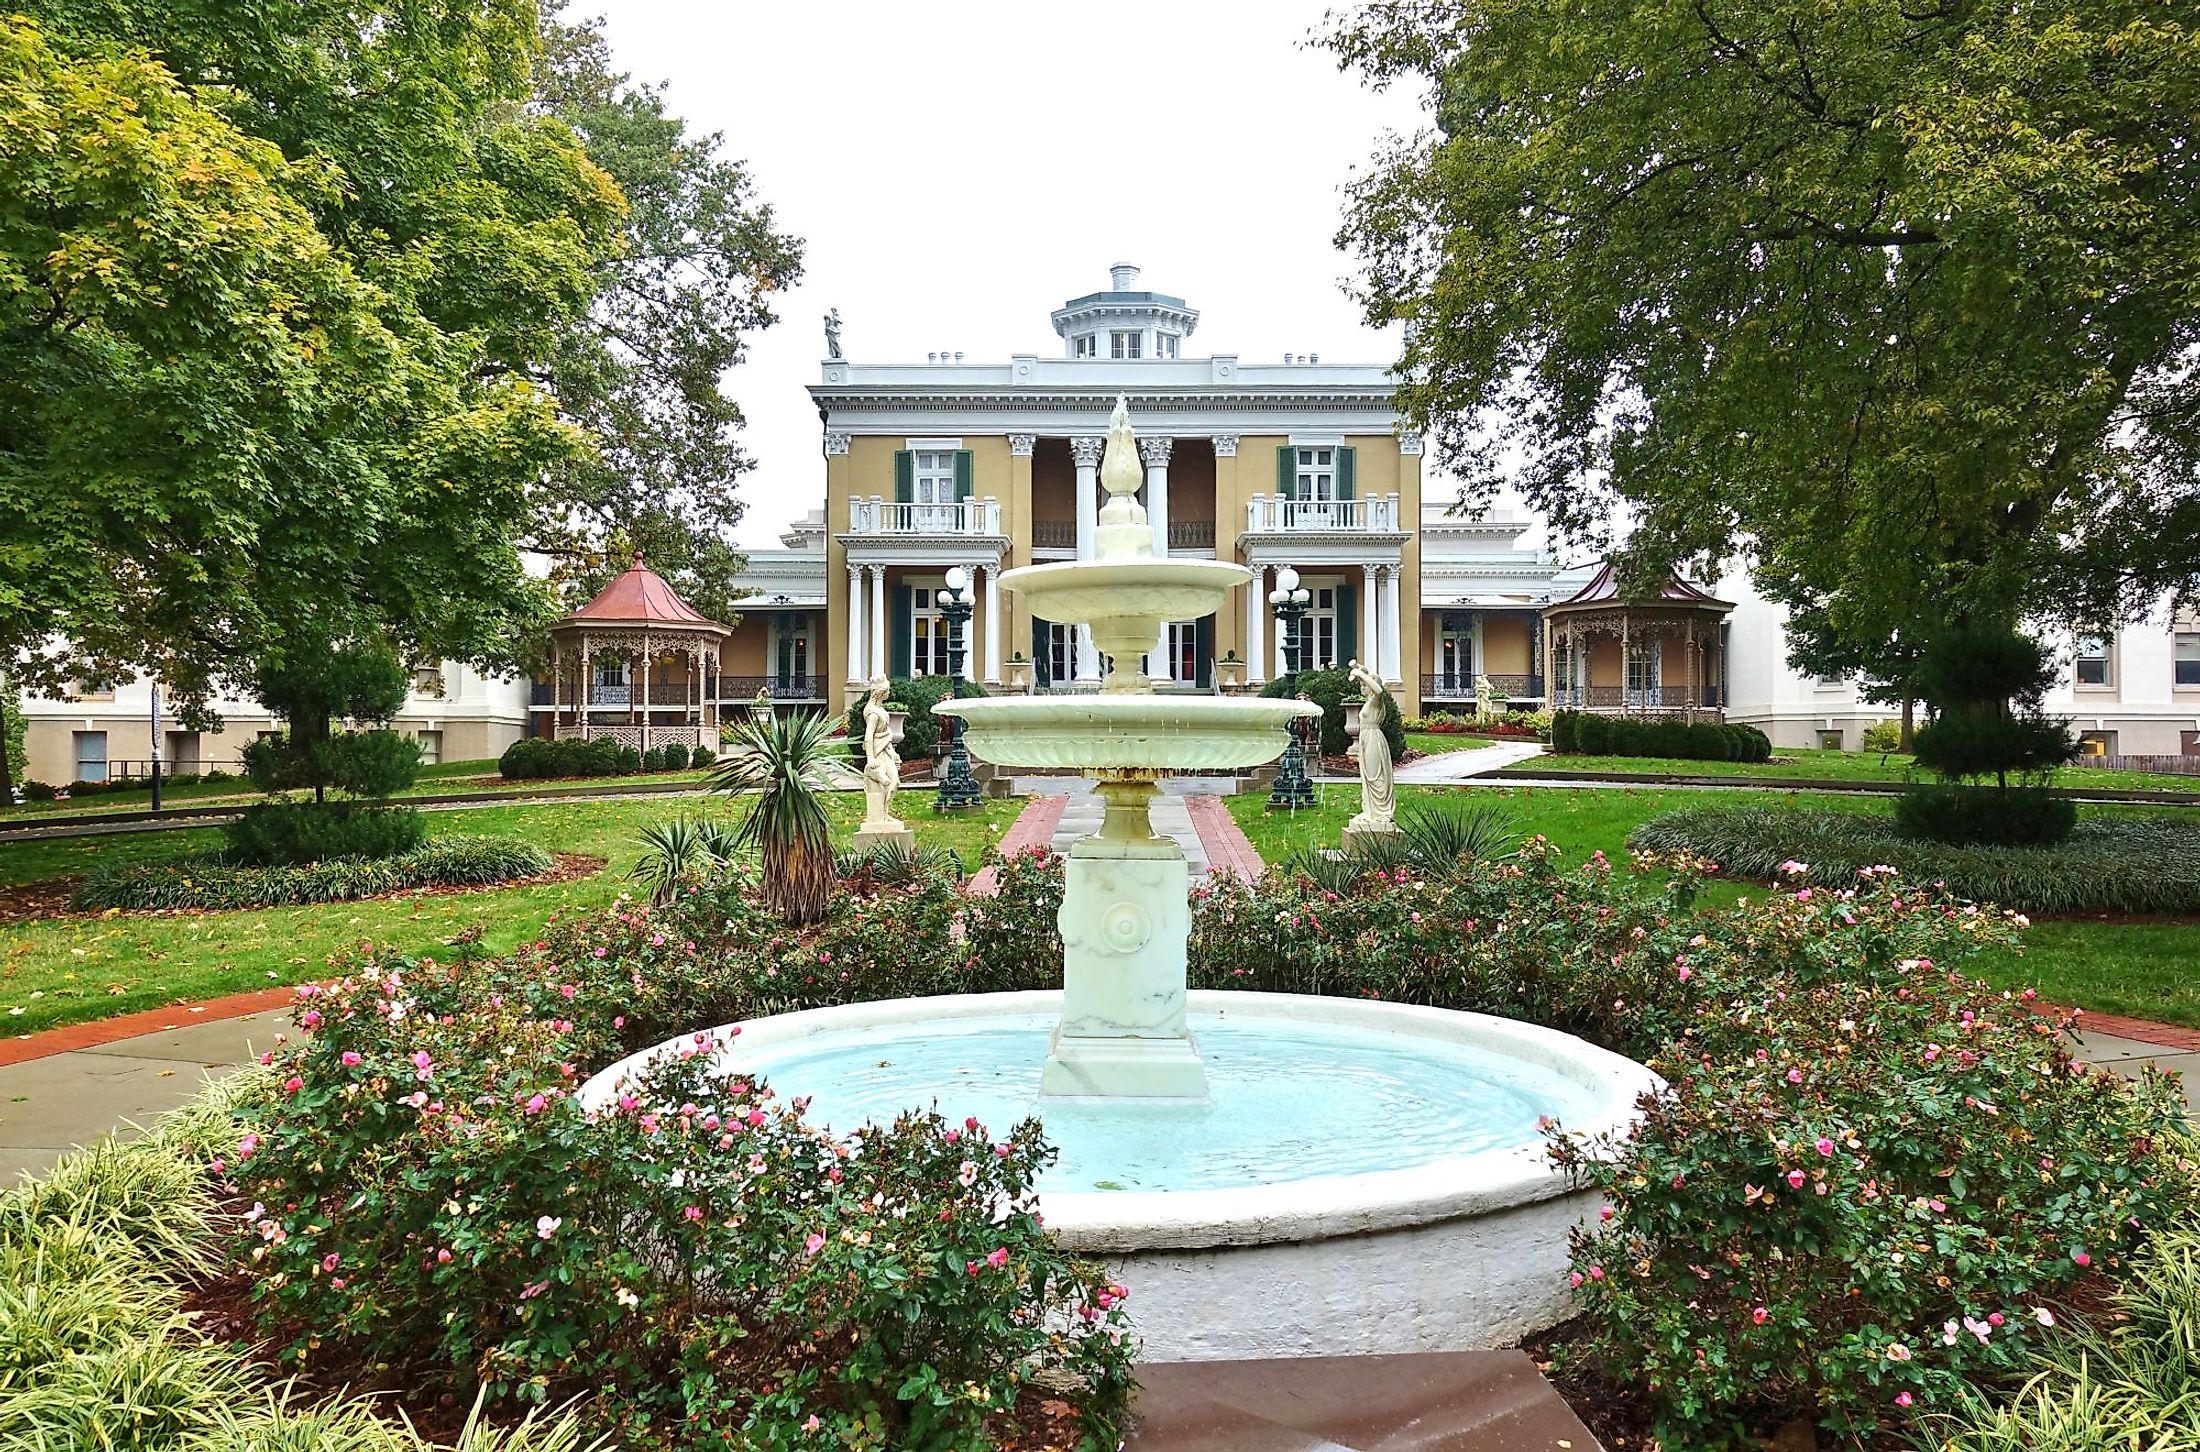 View of the historic Belmont Mansion (Acklen Hall) in Nashville, Tennessee. Editorial credit: EQRoy / Shutterstock.com